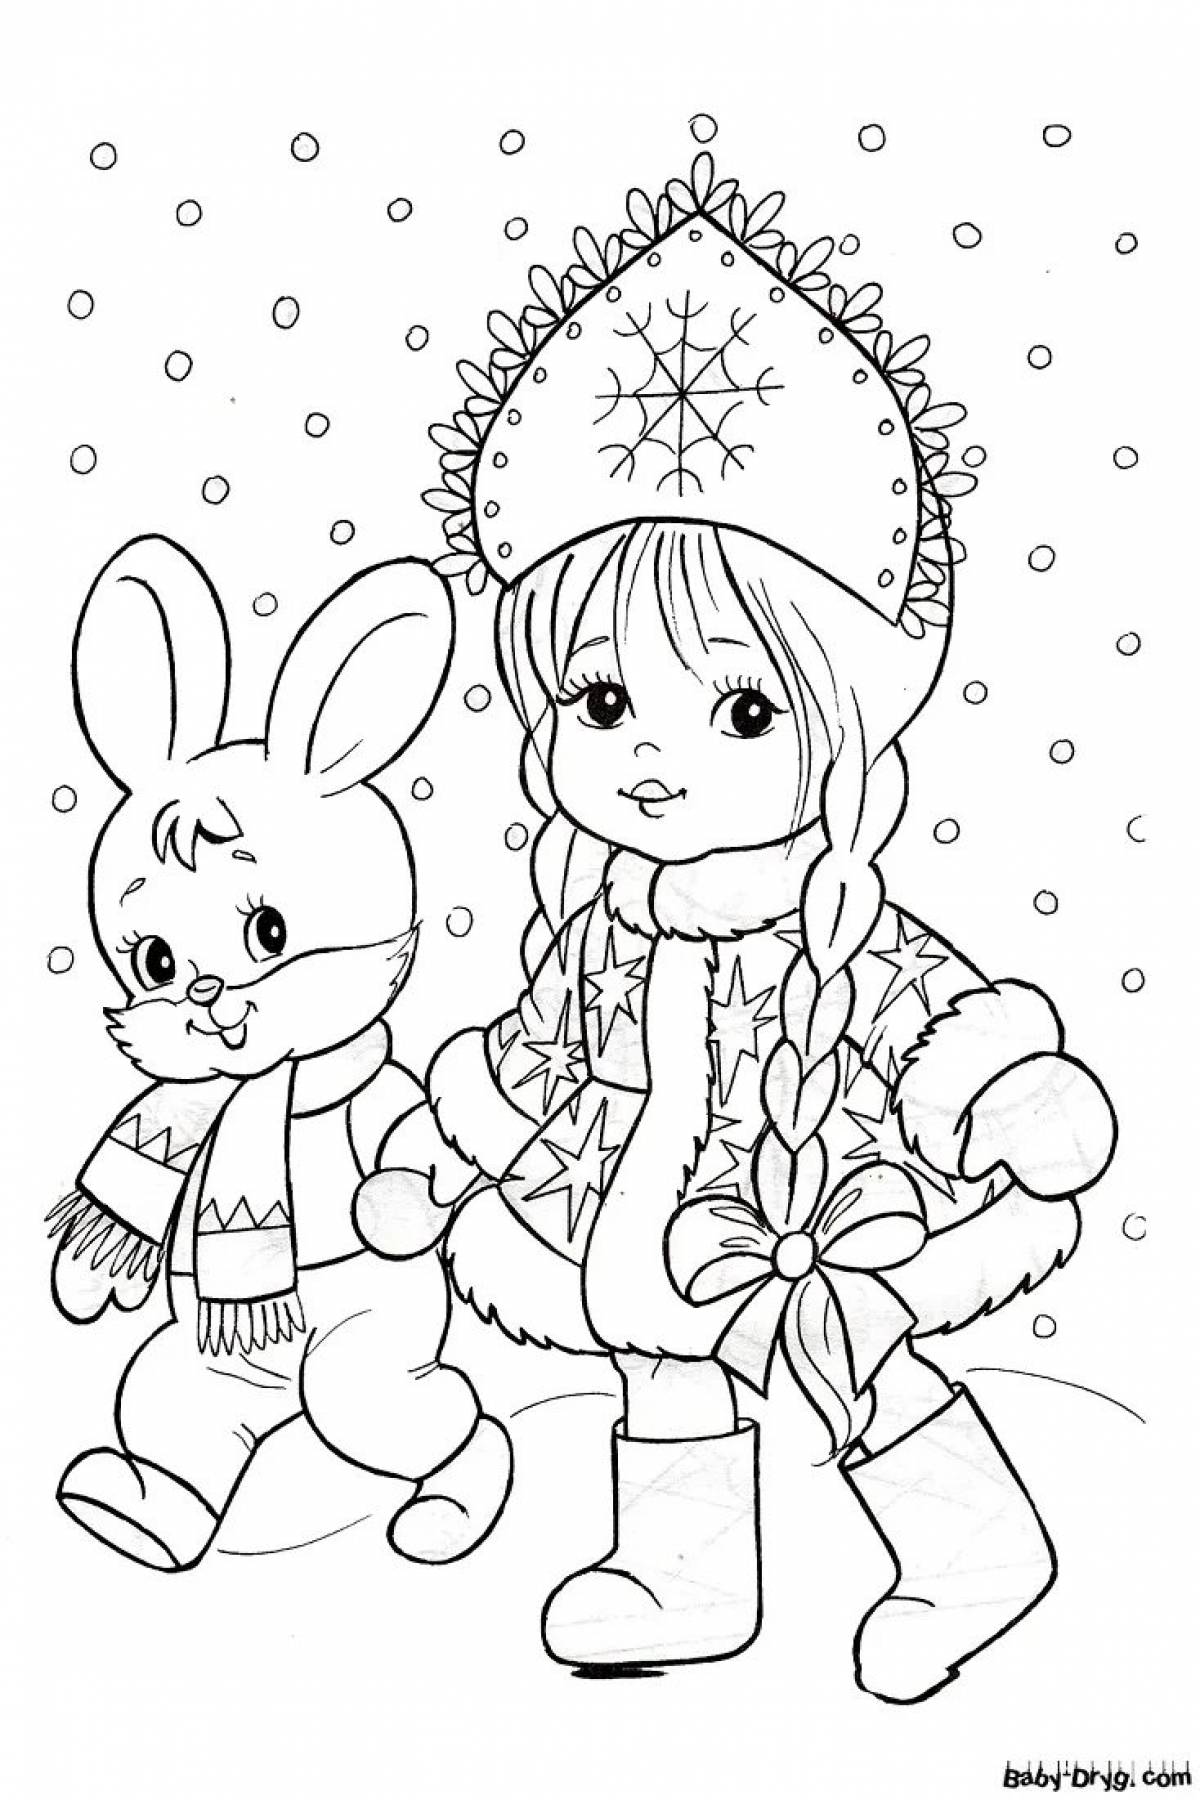 Luxury Christmas coloring book